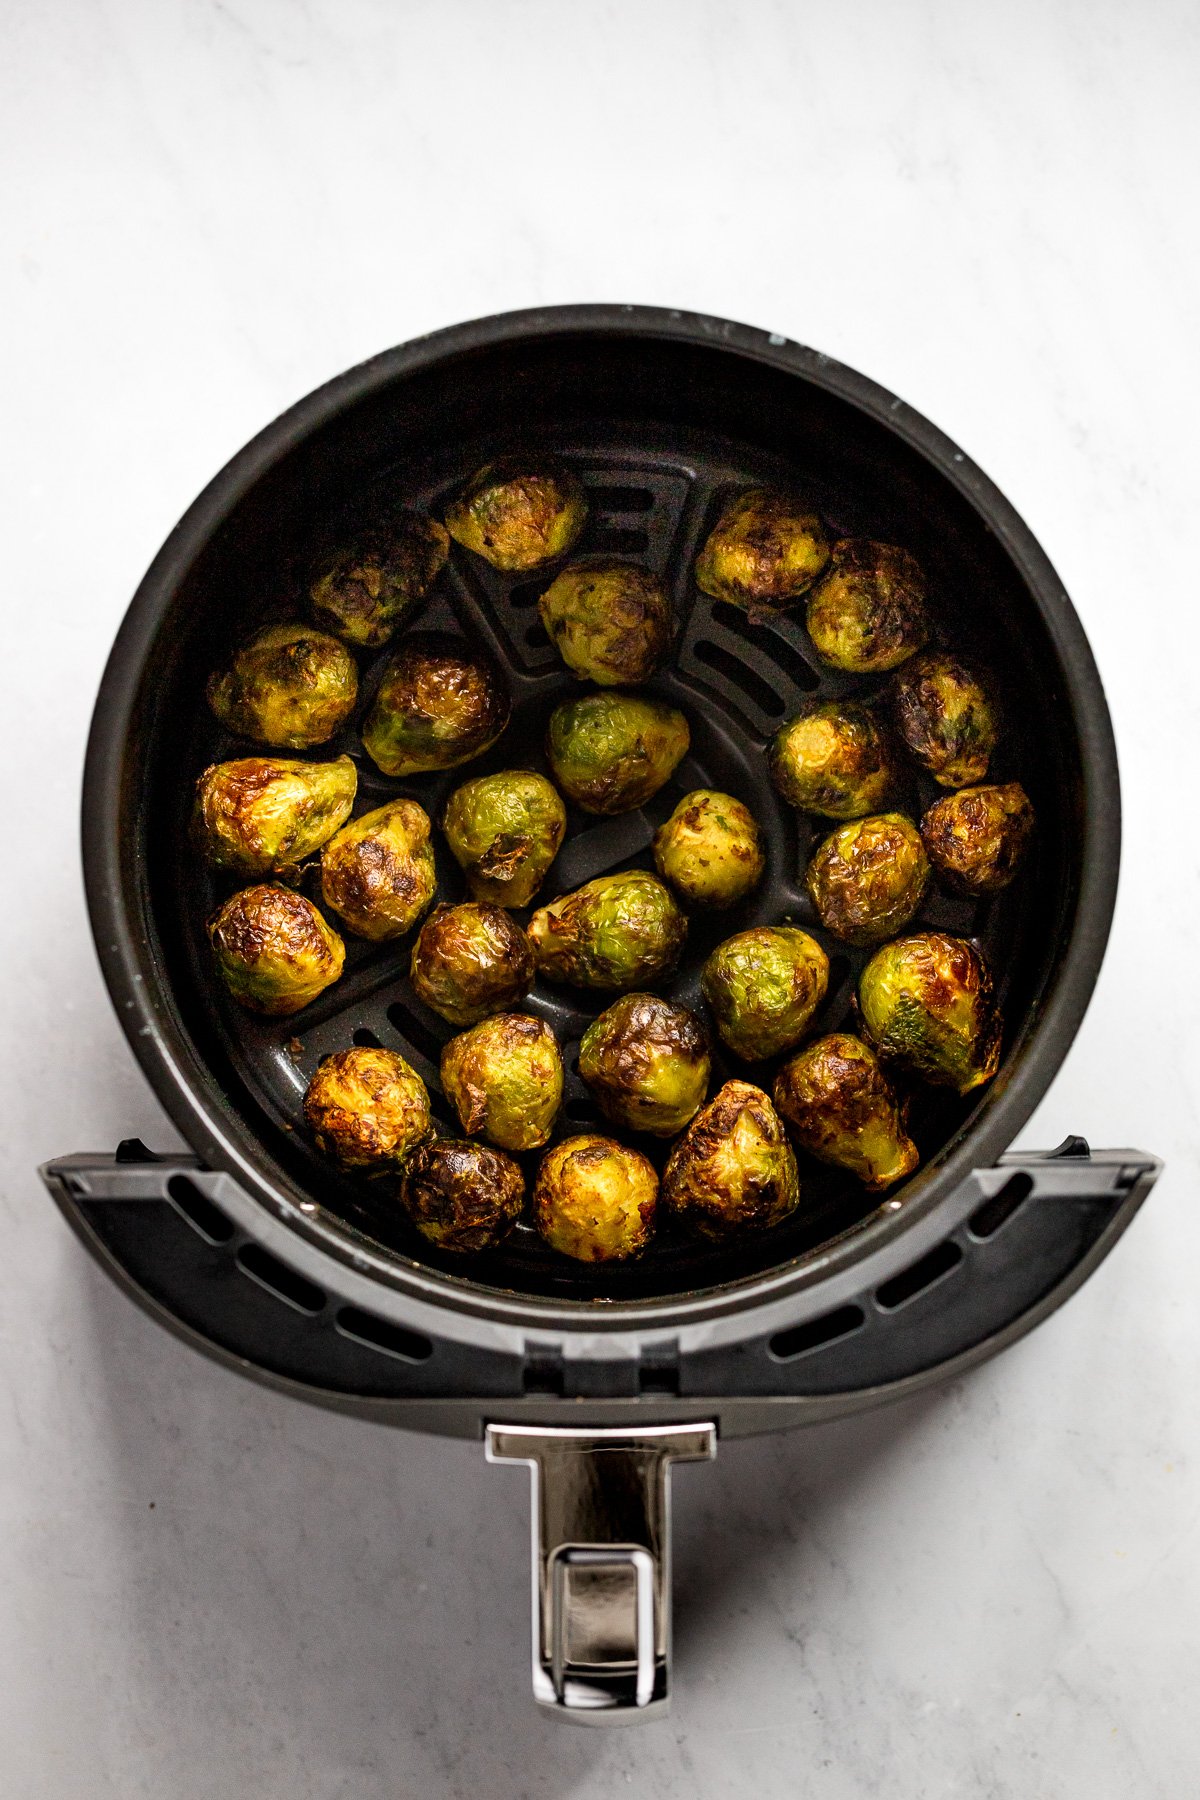 Brussels sprouts in air fryer after cooking with crispy exterior.